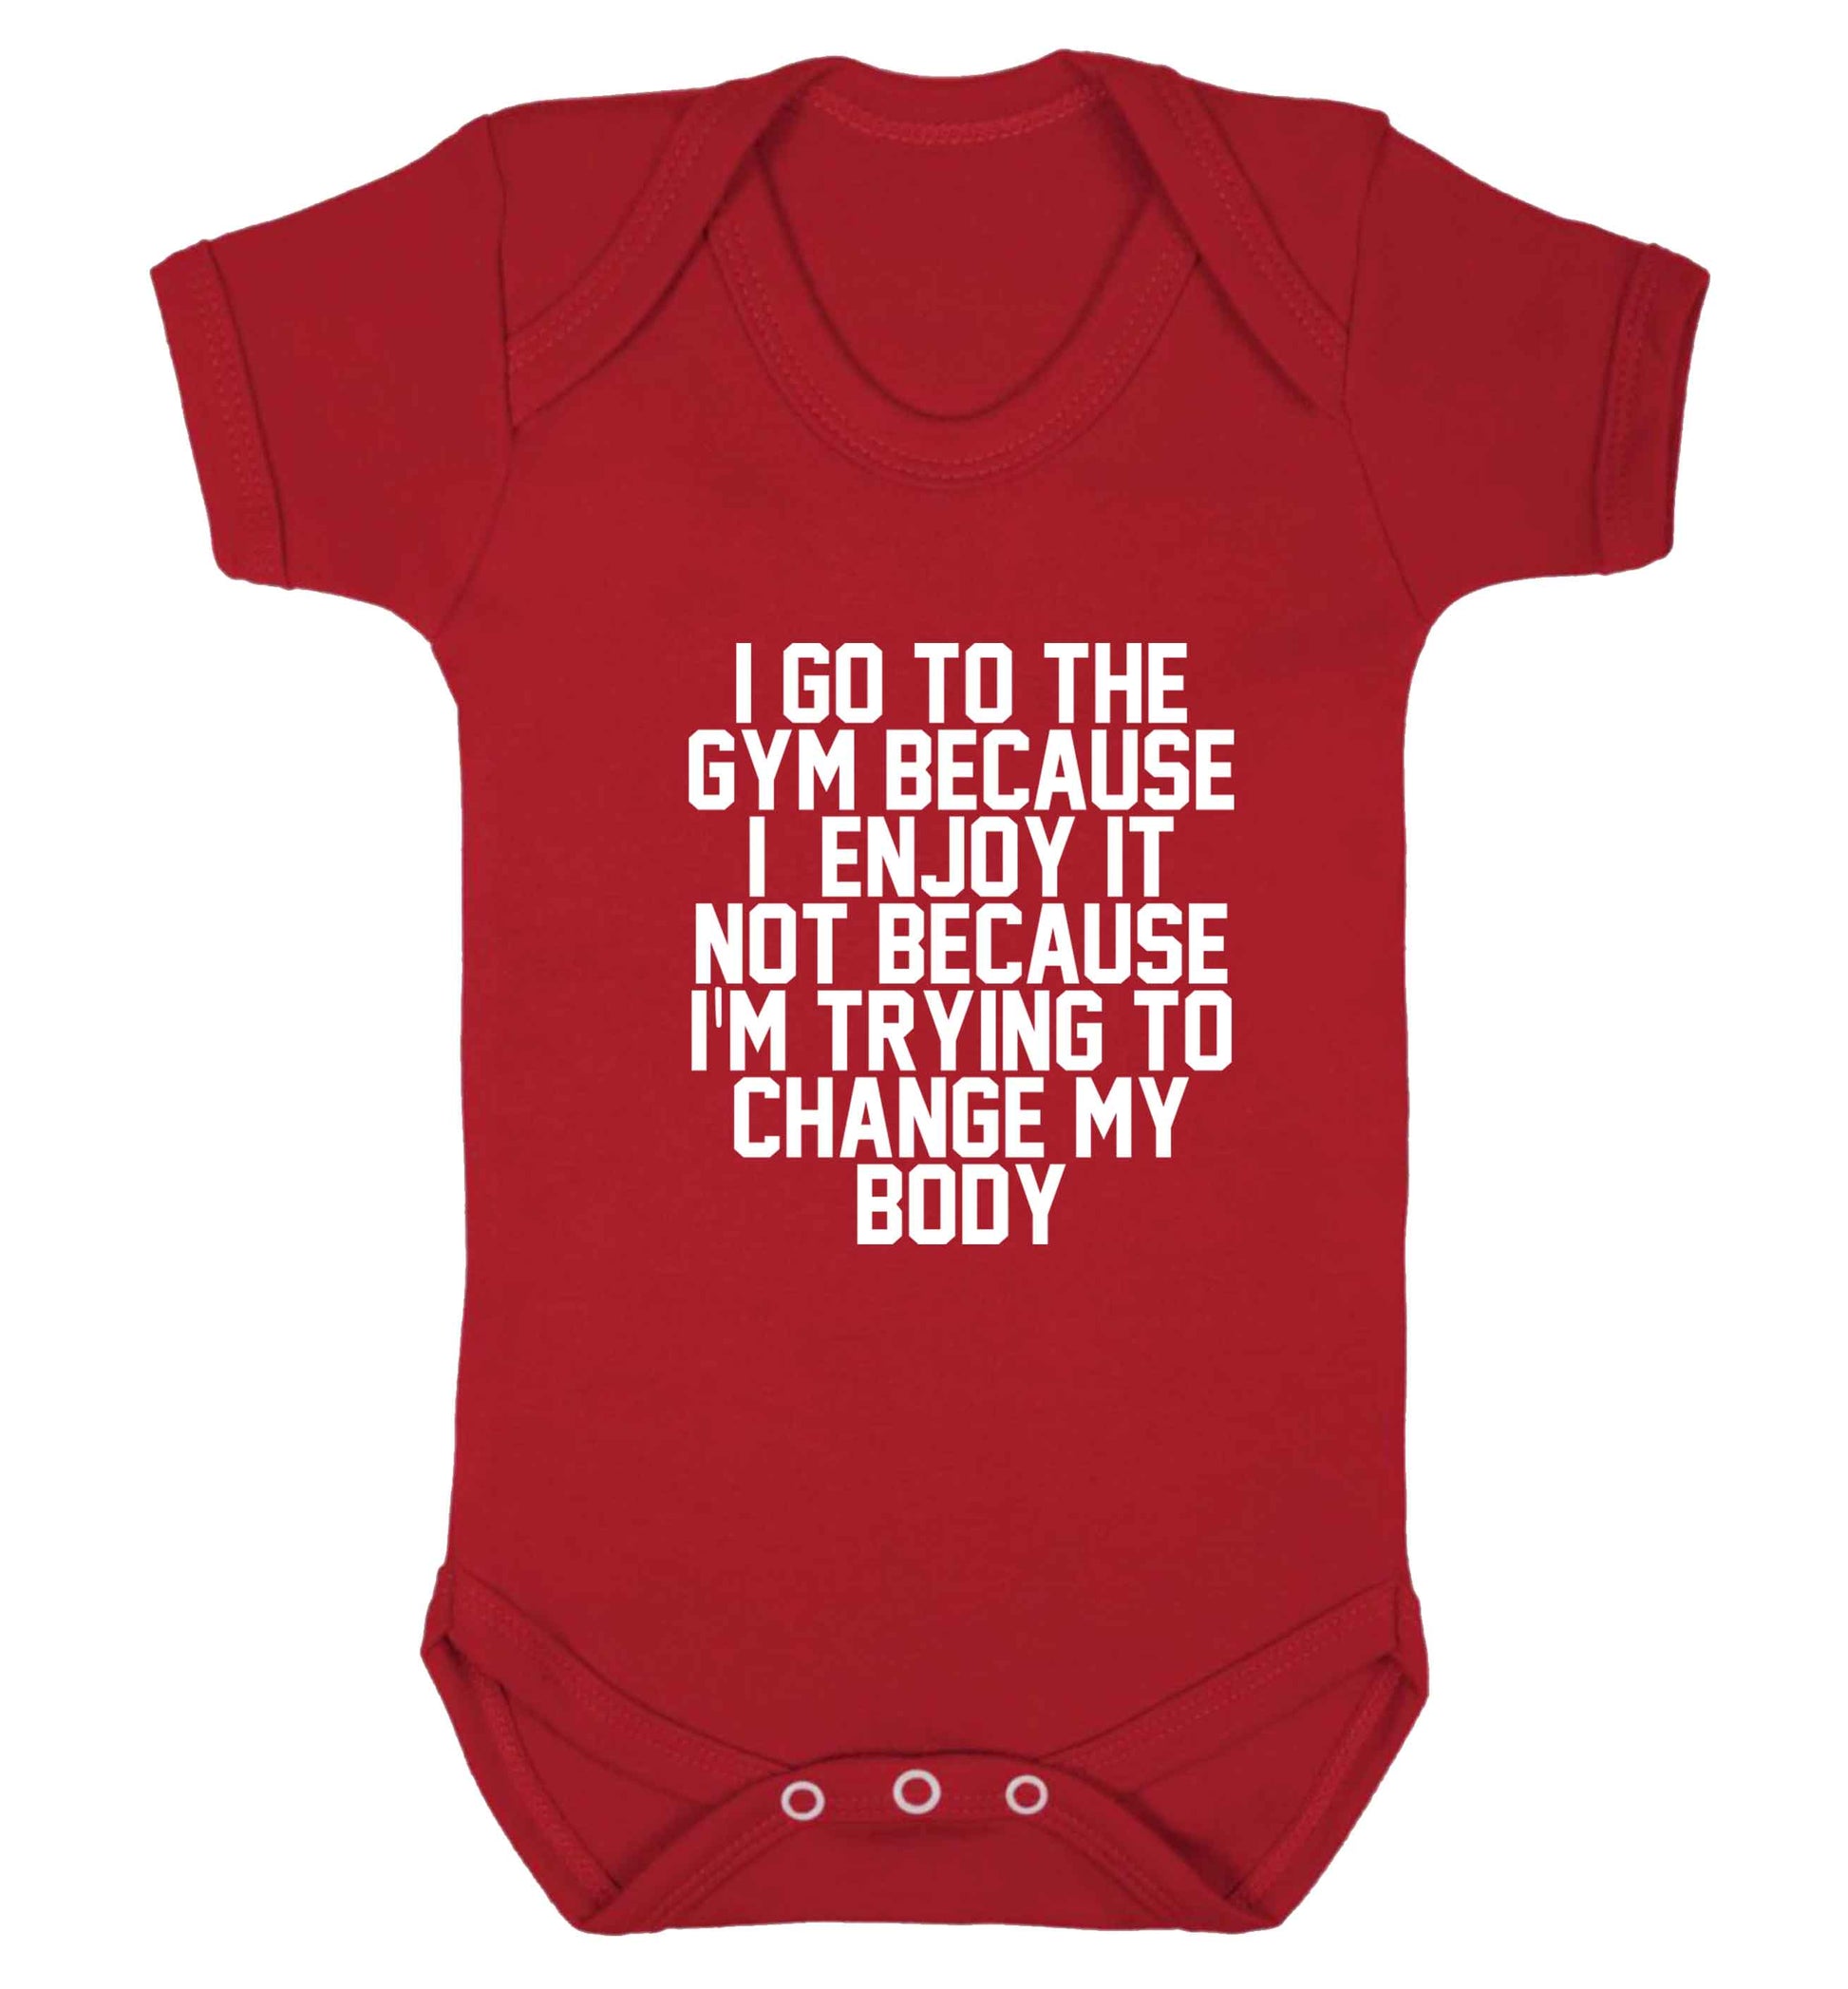 I go to the gym because I enjoy it not because I'm trying to change my body baby vest red 18-24 months